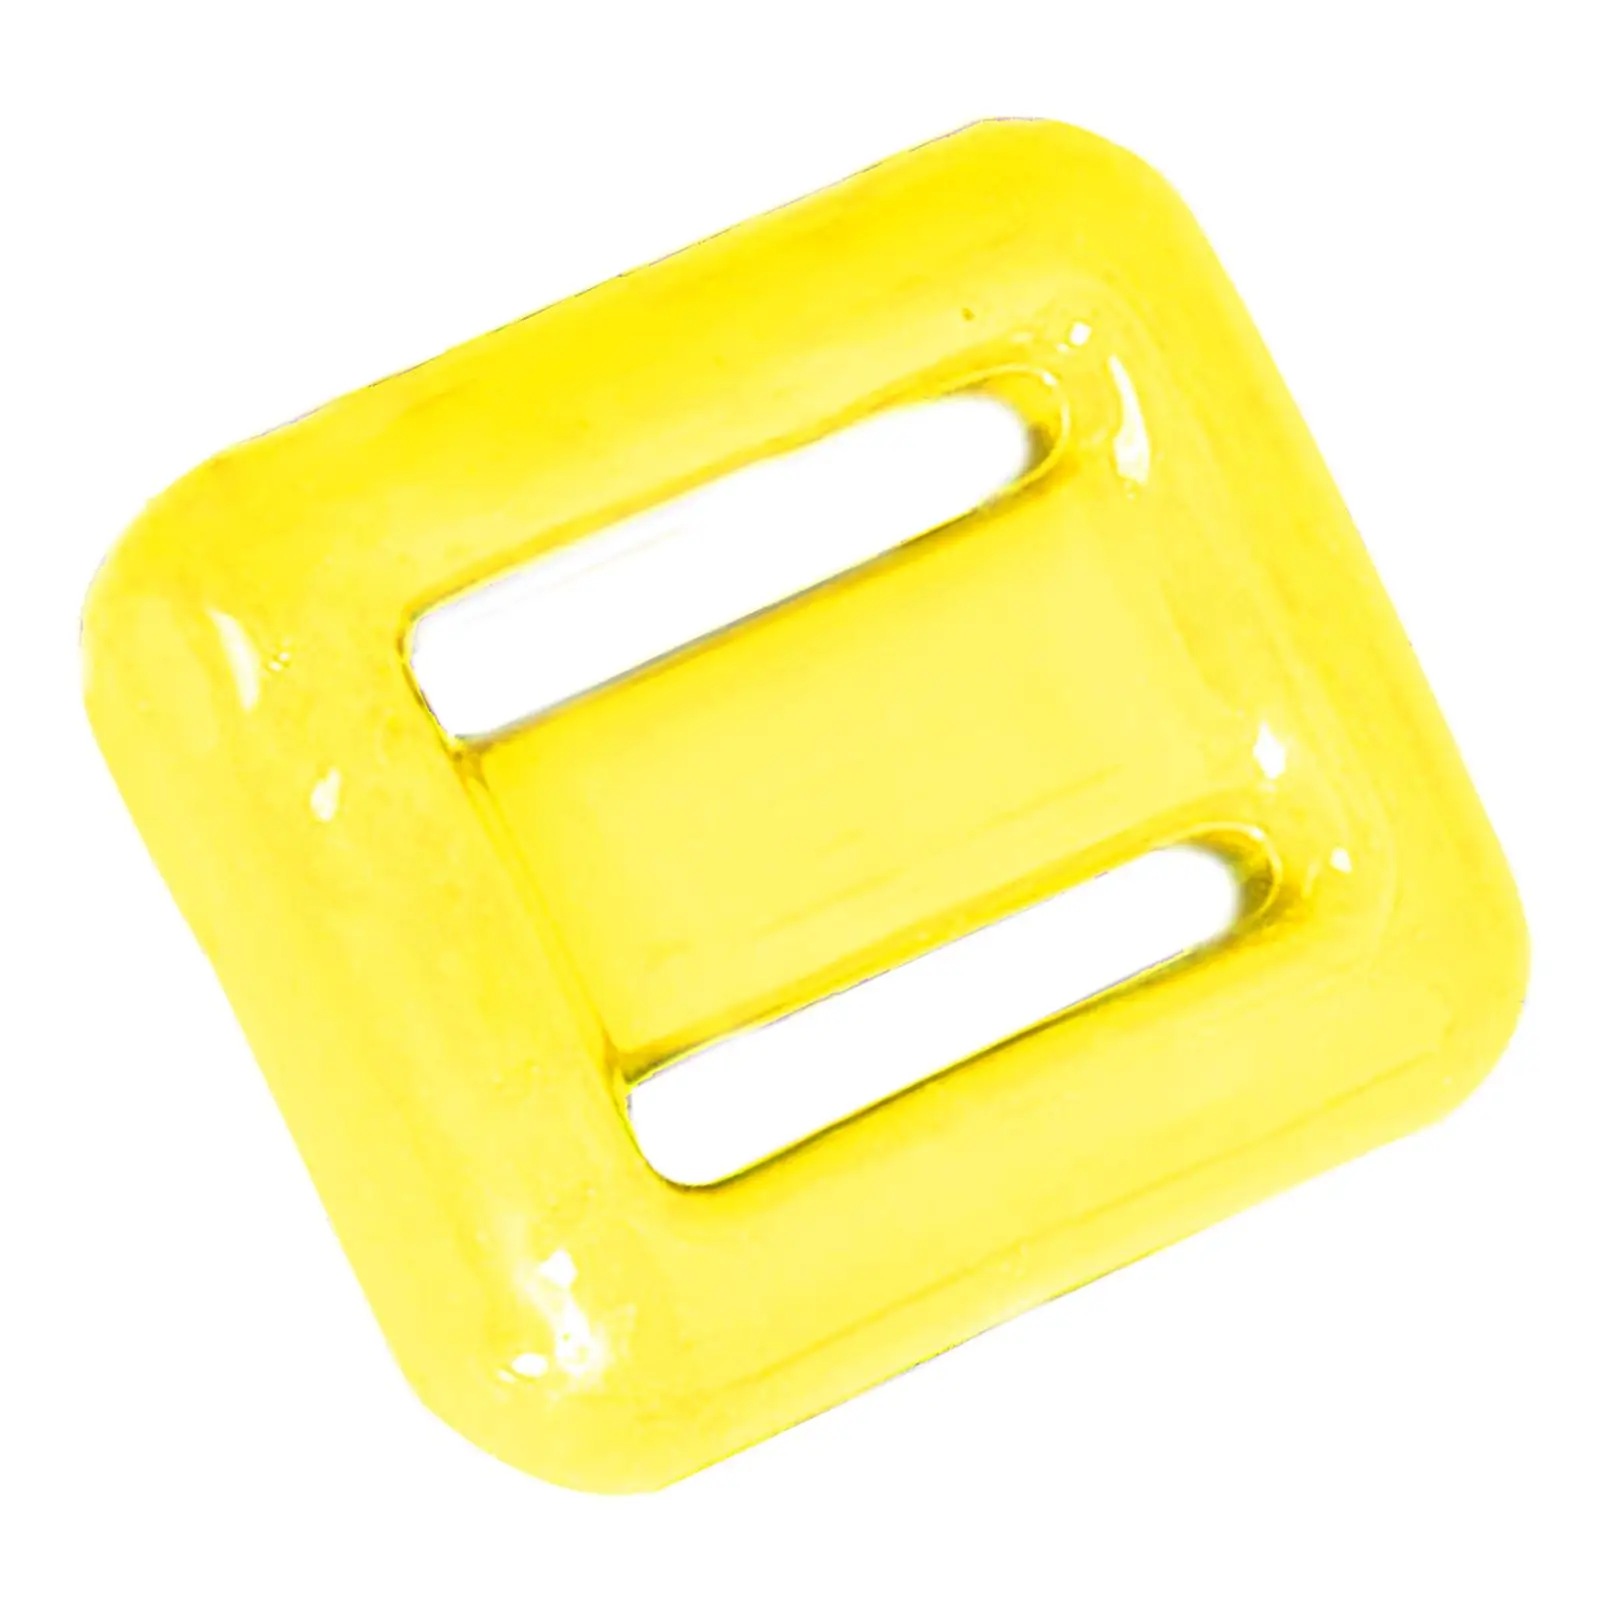 Soft Scuba Weights 0.5kg to 1.5kg PVC Equipment Coated Counterweight Non Slip